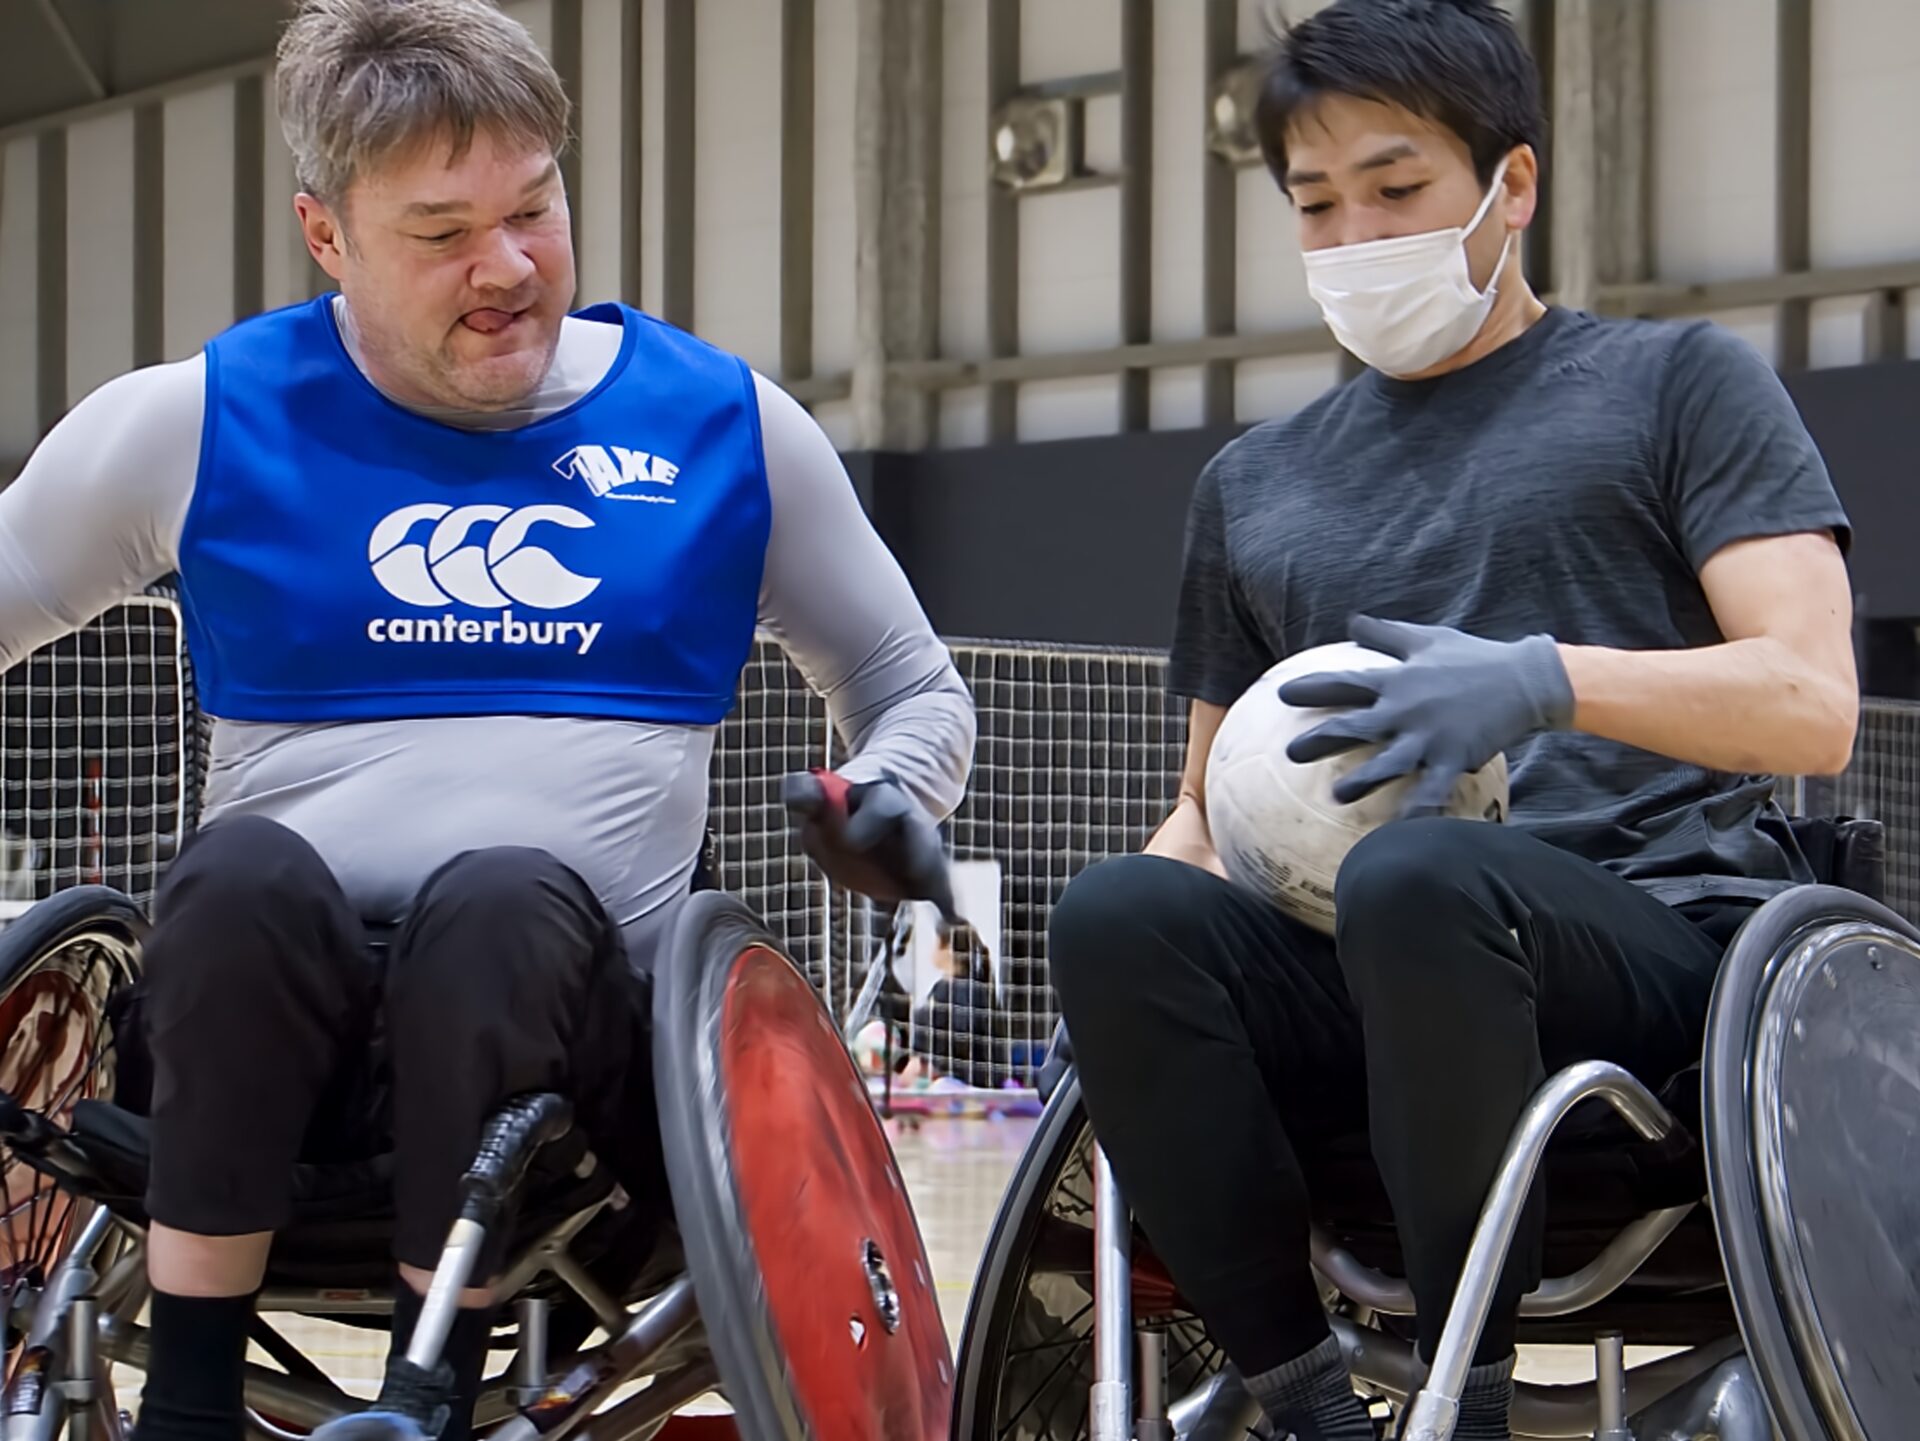 Wheelchair Rugby 中谷HCとニック選手のマッチ(AXE)-Journal-ONE撮影